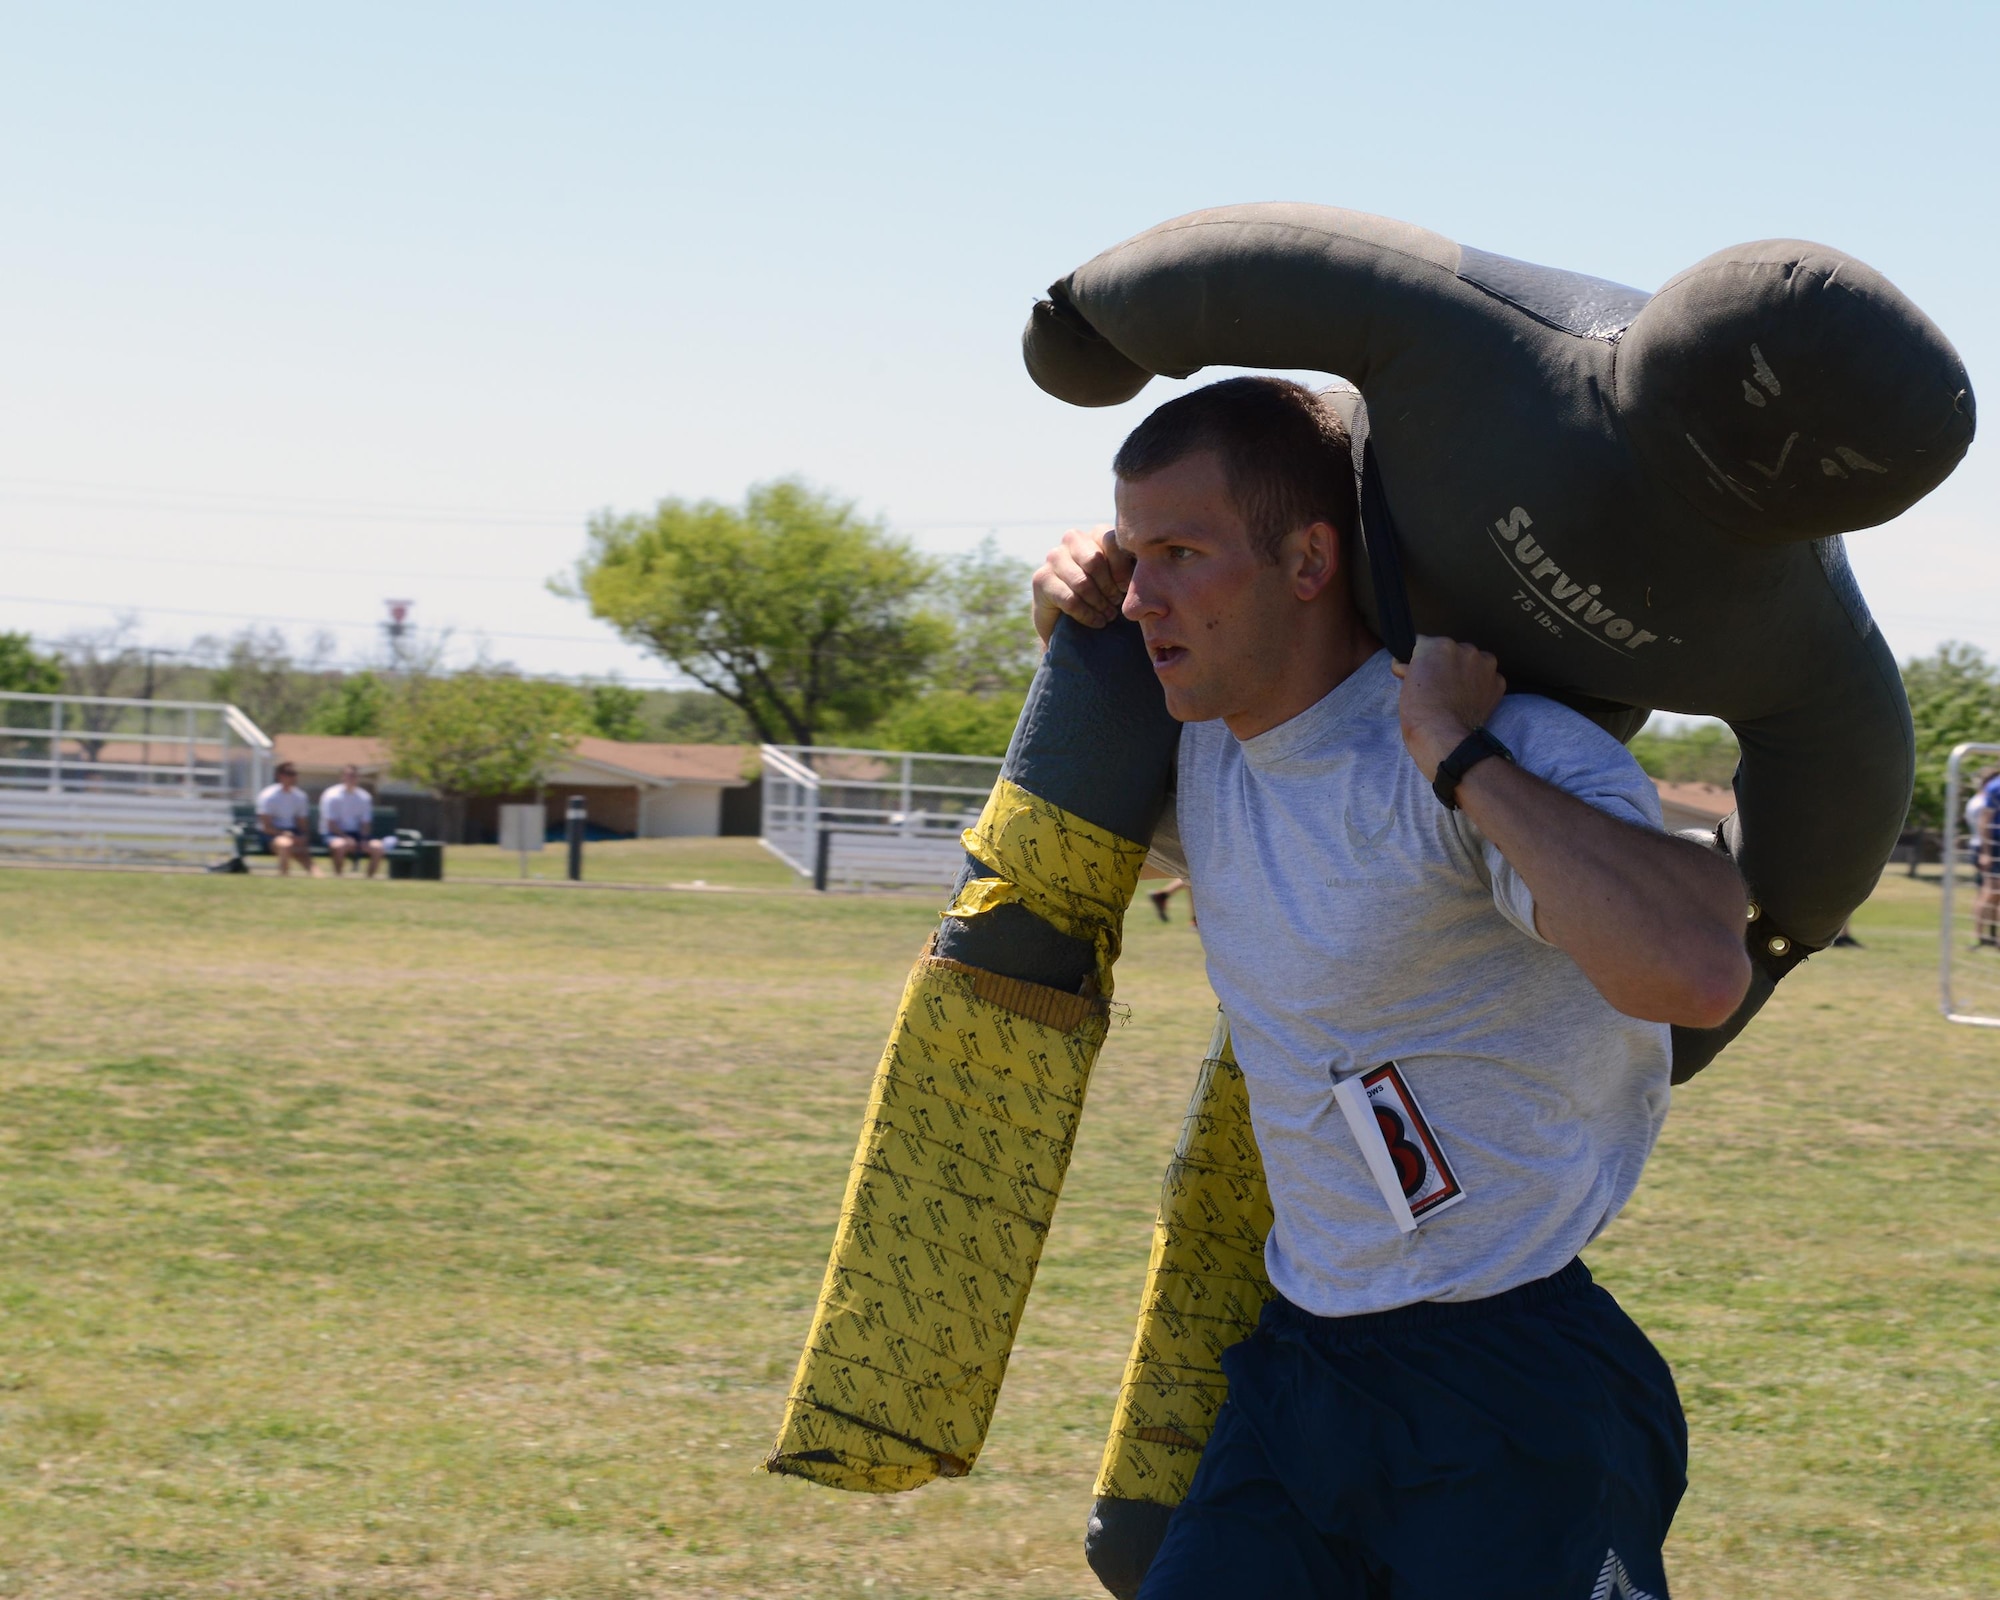 2nd Lt. Christopher Brown, 47th Student Squadron awaiting pilot training, carries a dummy across the football field at Laughlin Air Force Base, Texas, April 5, 2016. The dummy carry involved running a 100 yard sprint with a 75-pound dummy. (U.S. Air Force photo by Senior Airman Jimmie D. Pike) 